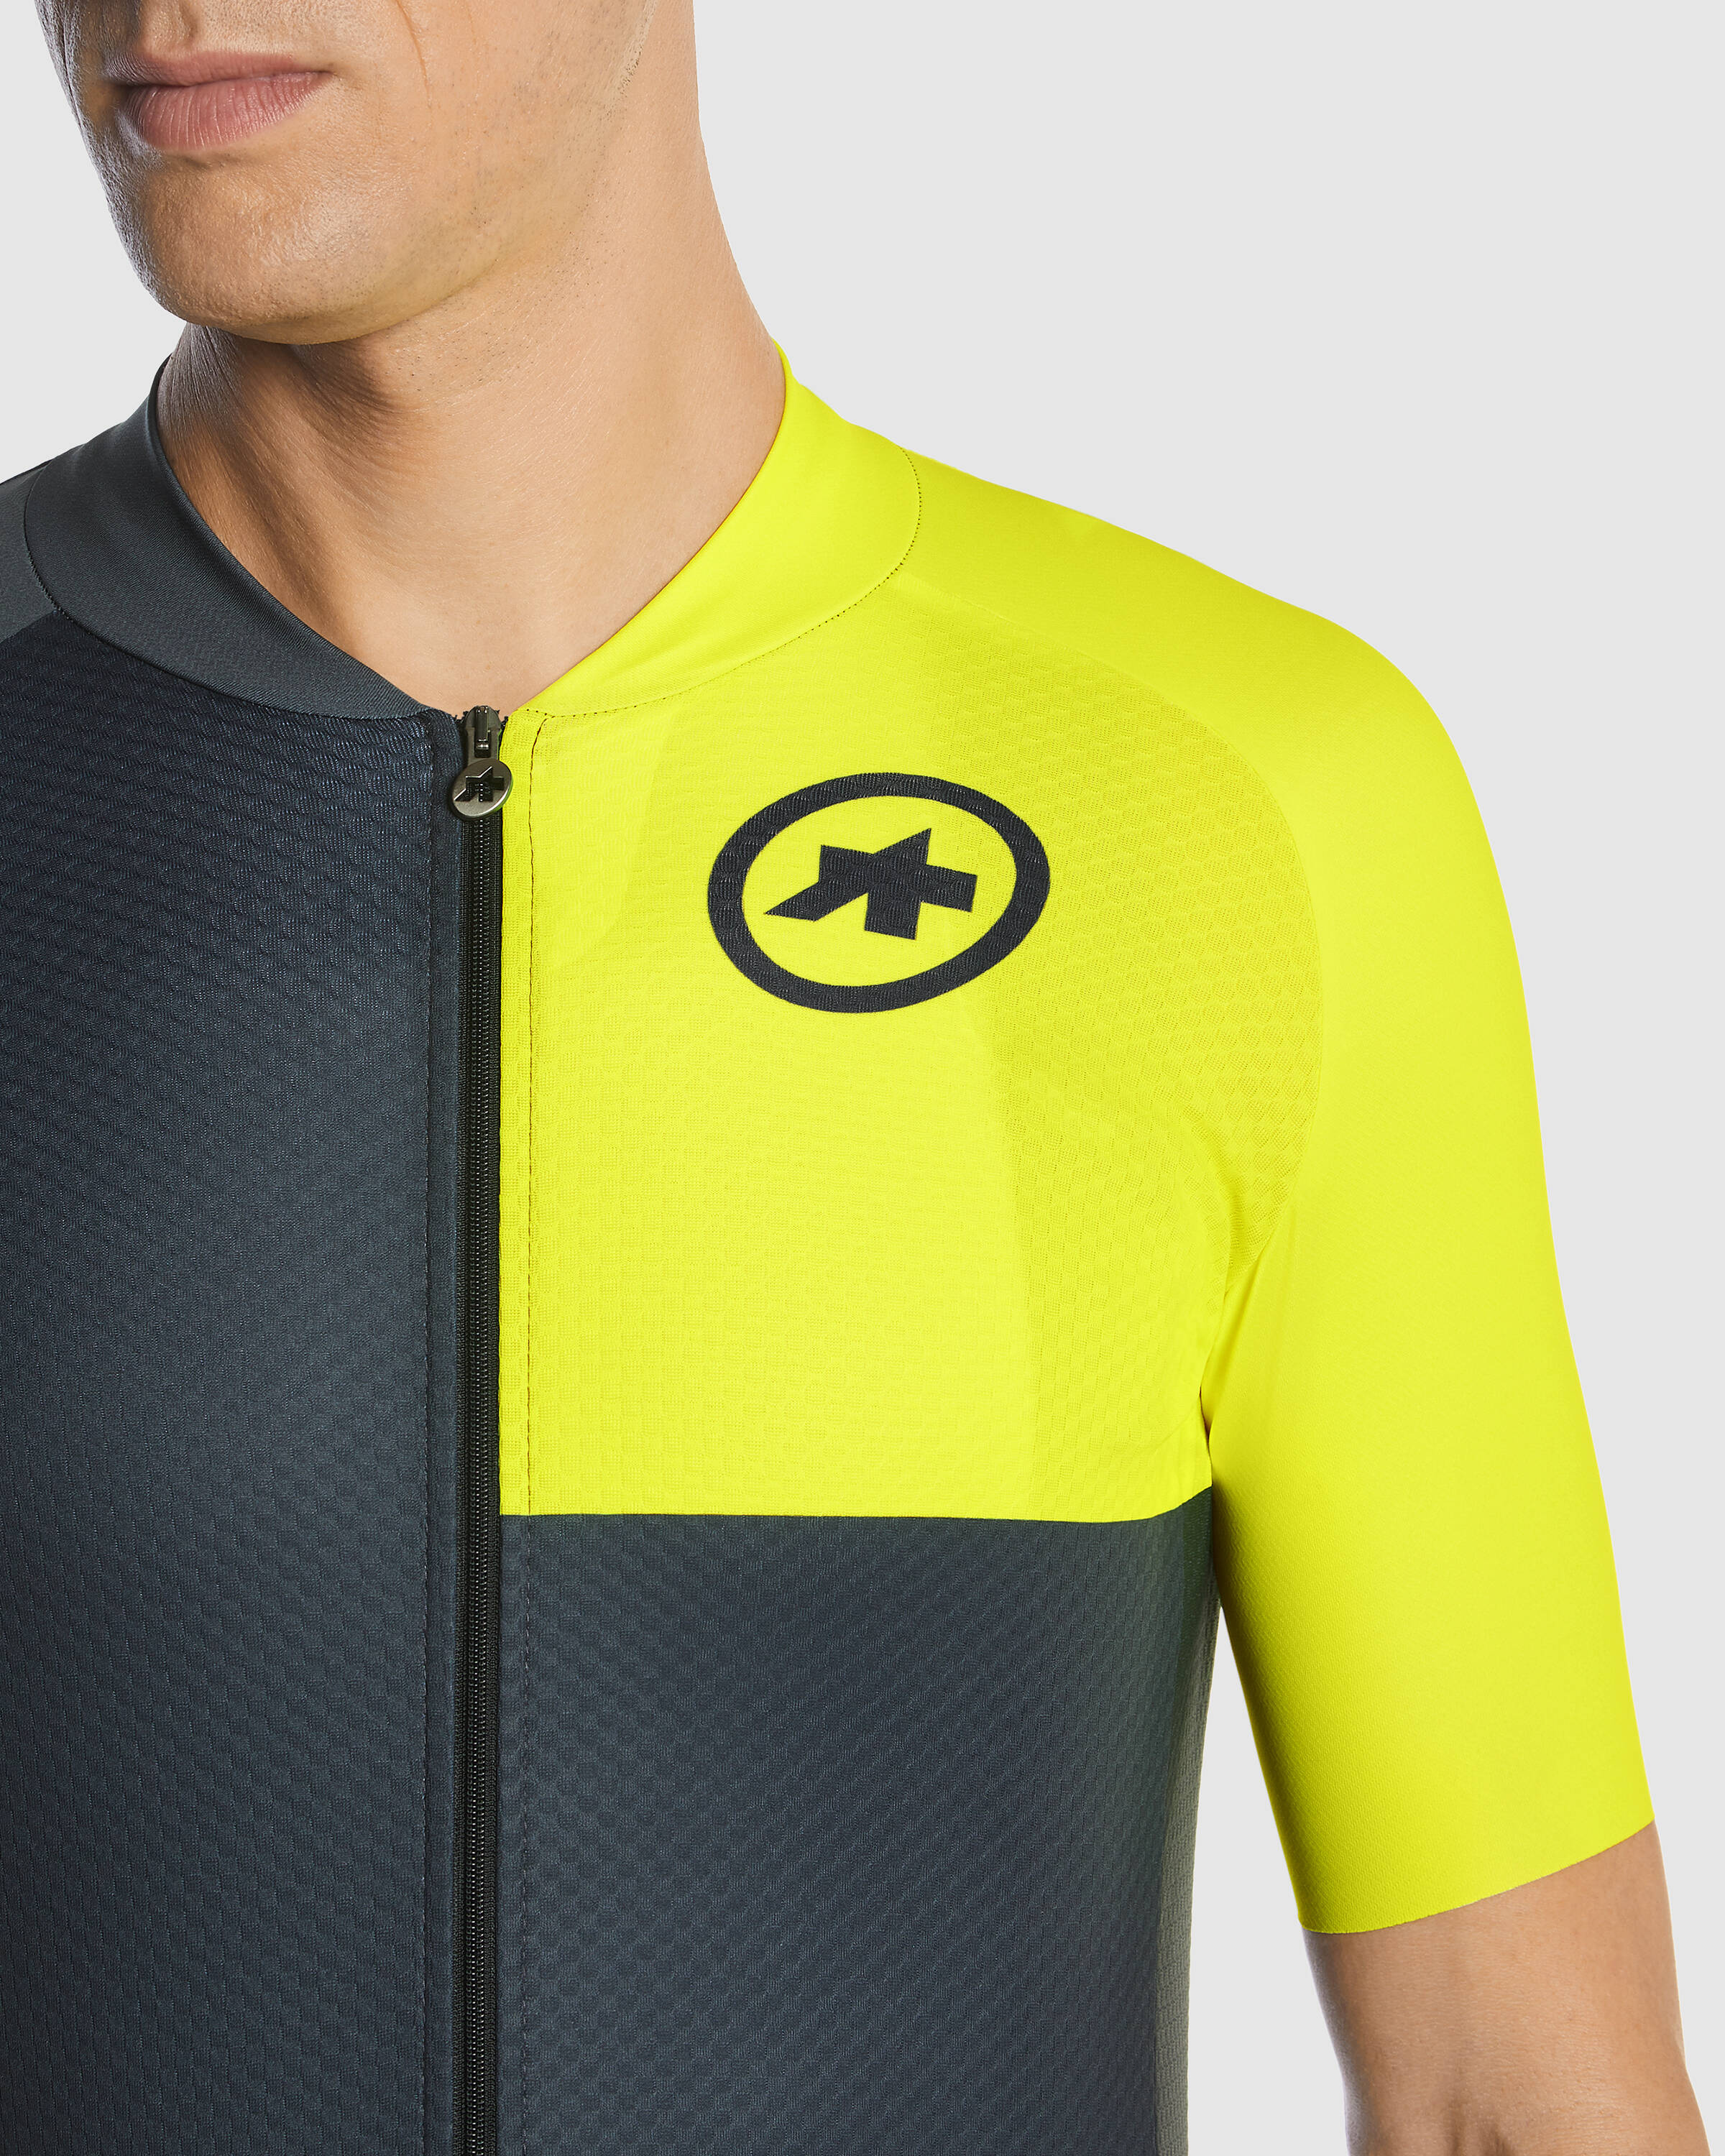 MILLE GT Jersey C2 EVO Stahlstern - ASSOS Of Switzerland - Official Outlet